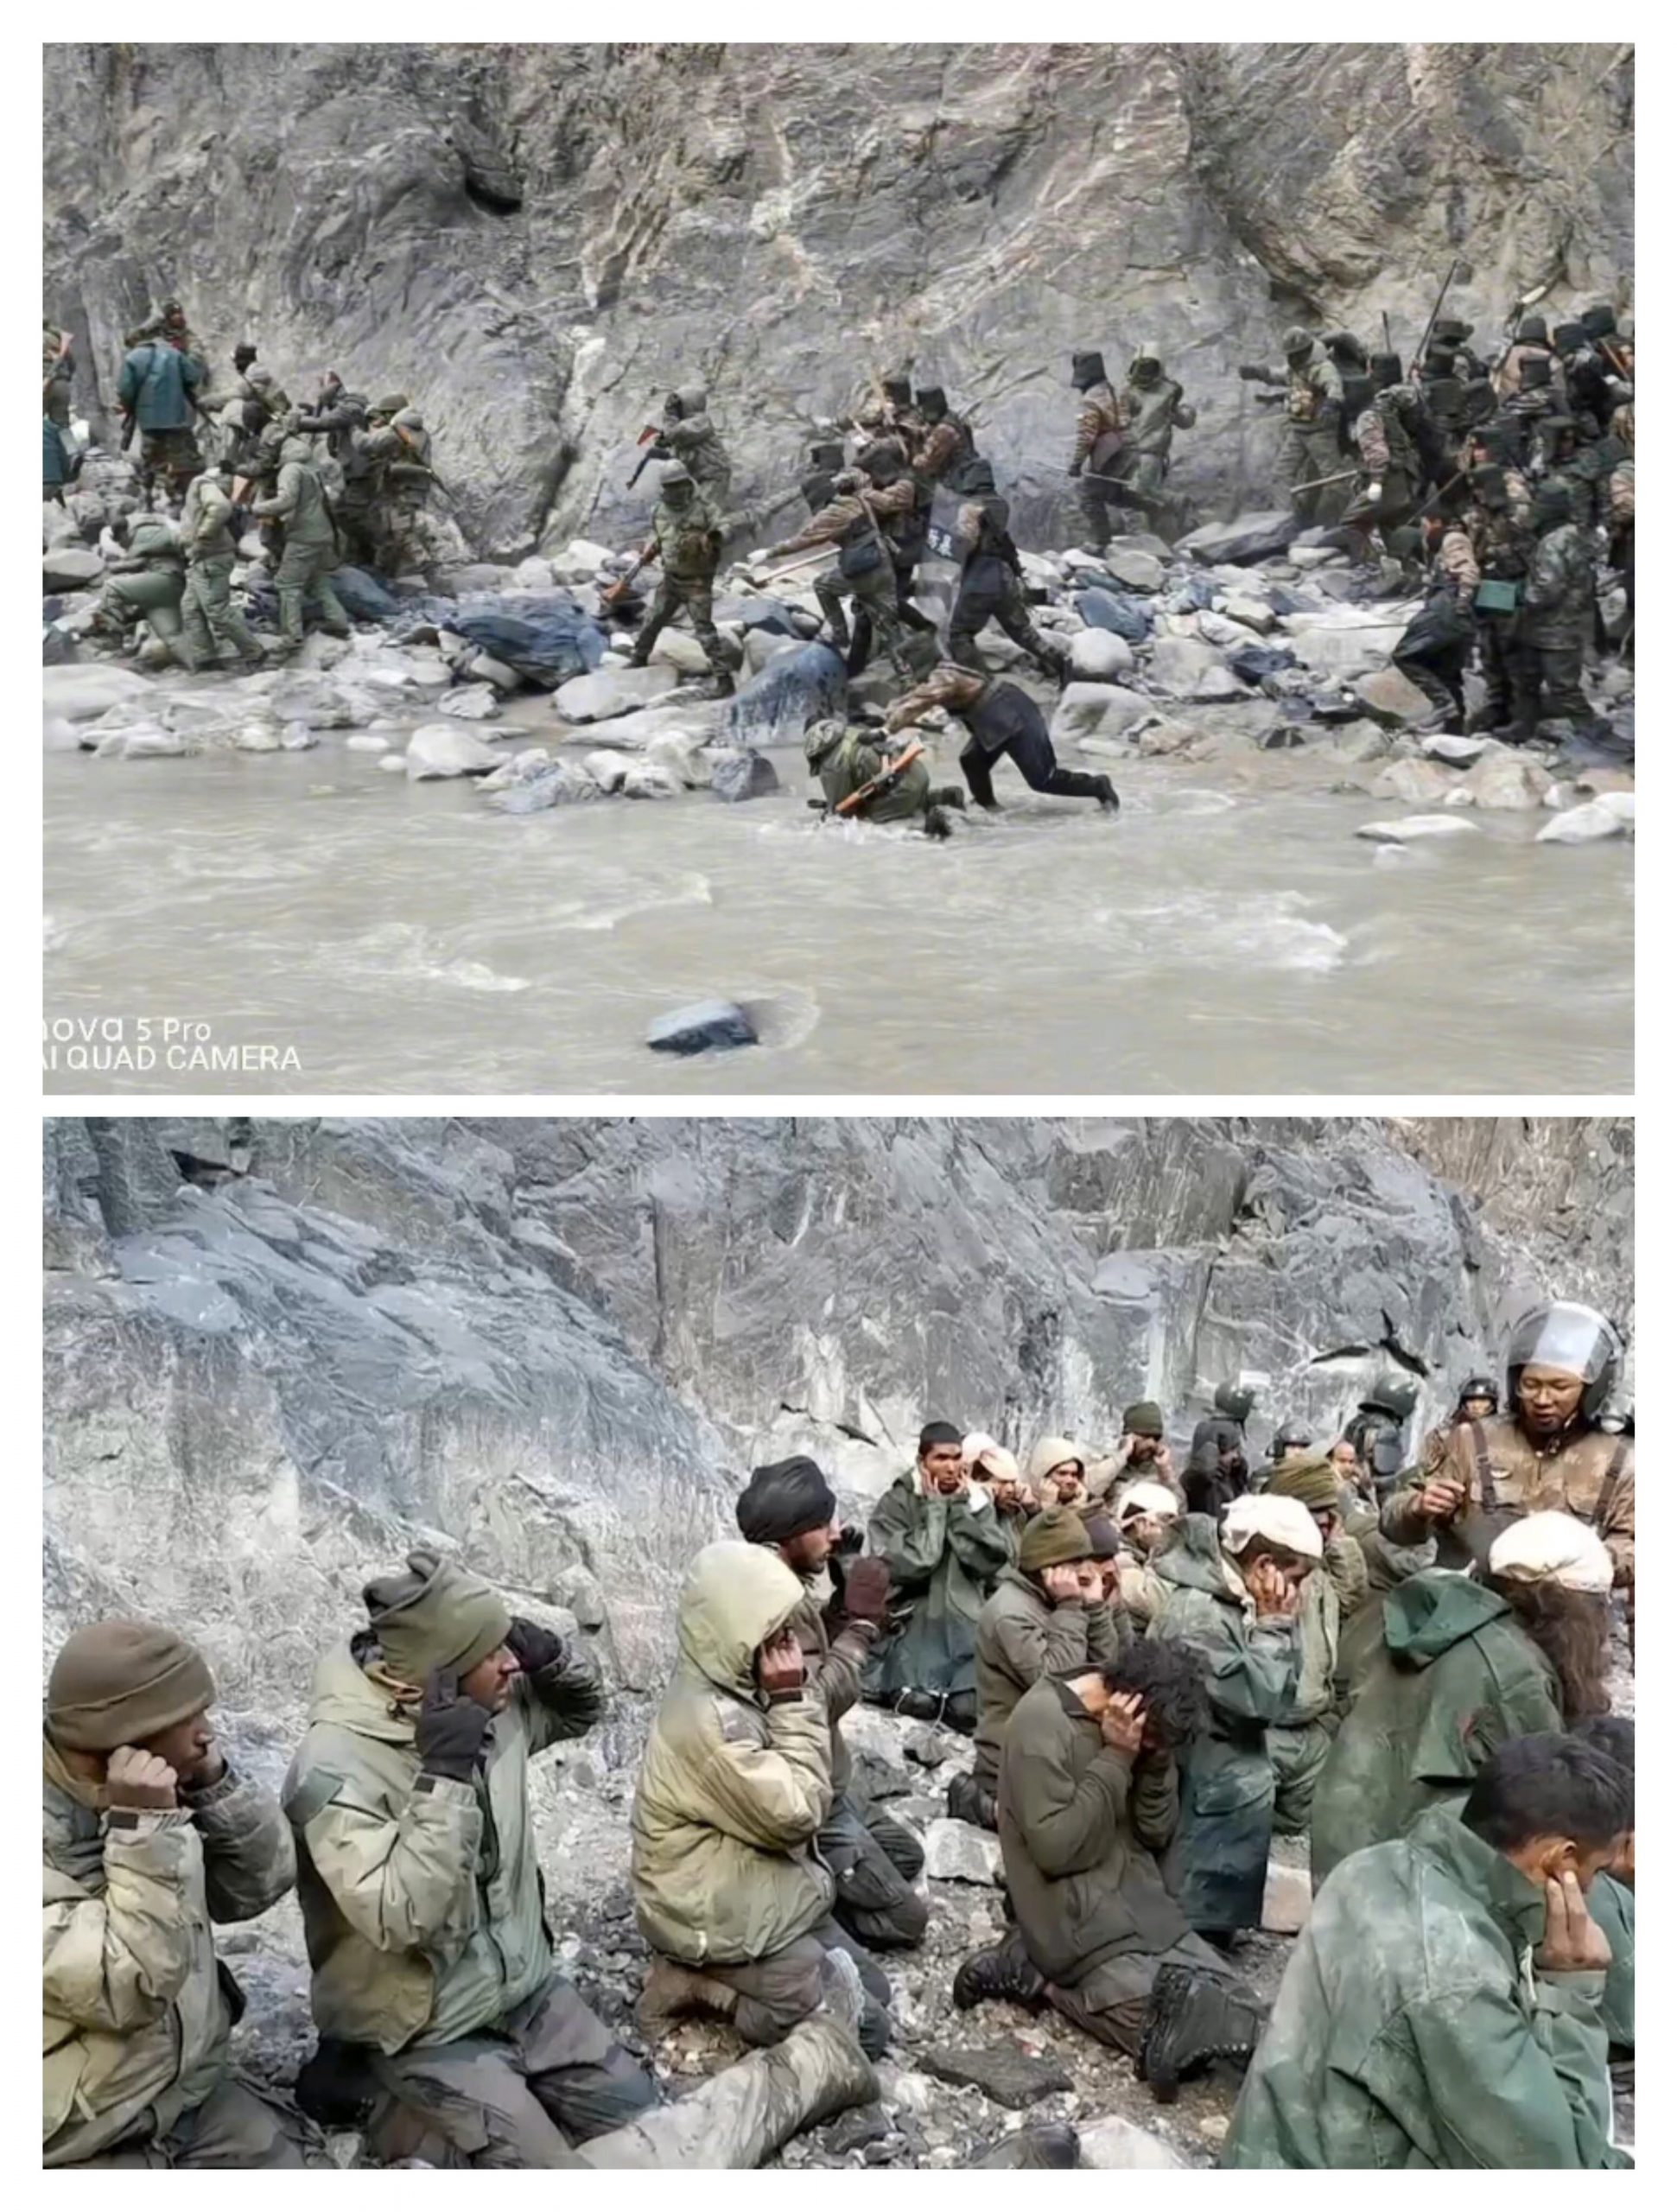 Beijing released new images of the Gulan clashes between China and India last year on Chinese social media platforms.